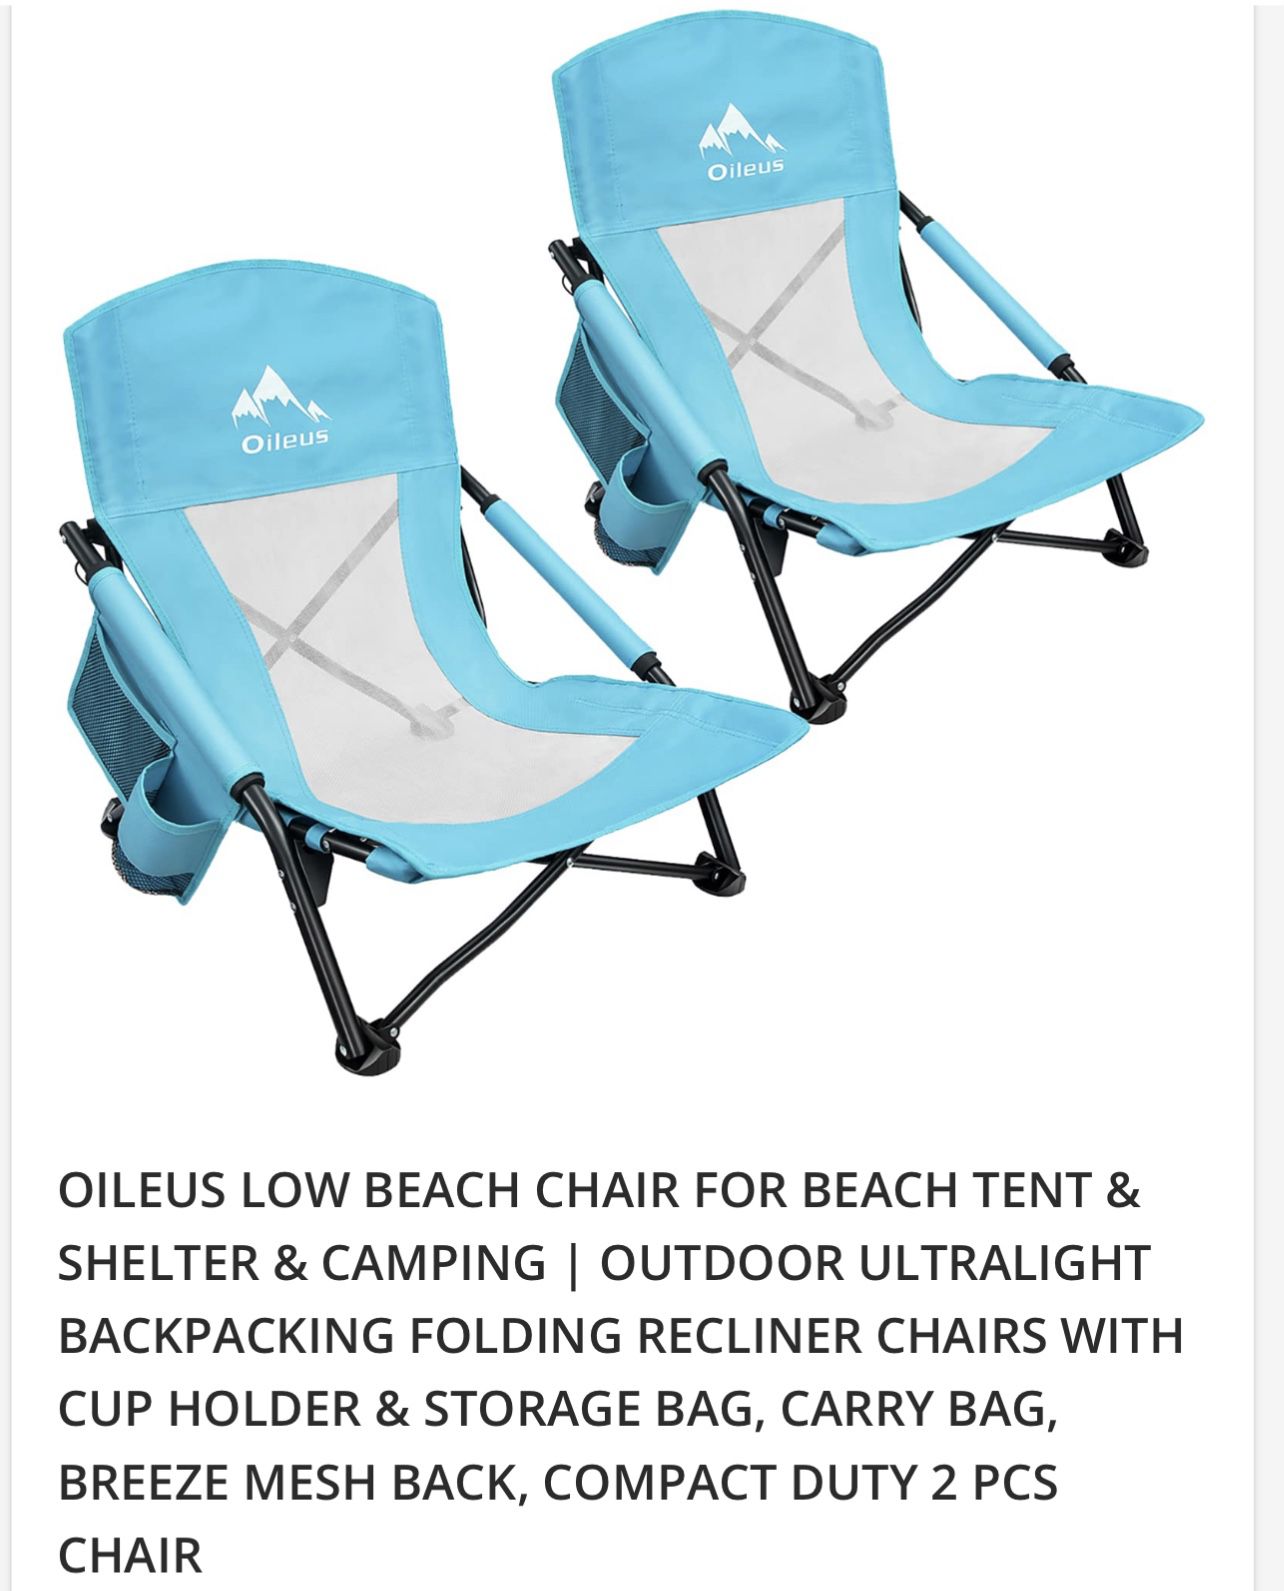 OILEUS LOW BEACH CHAIR FOR BEACH TENT & SHELTER & CAMPING